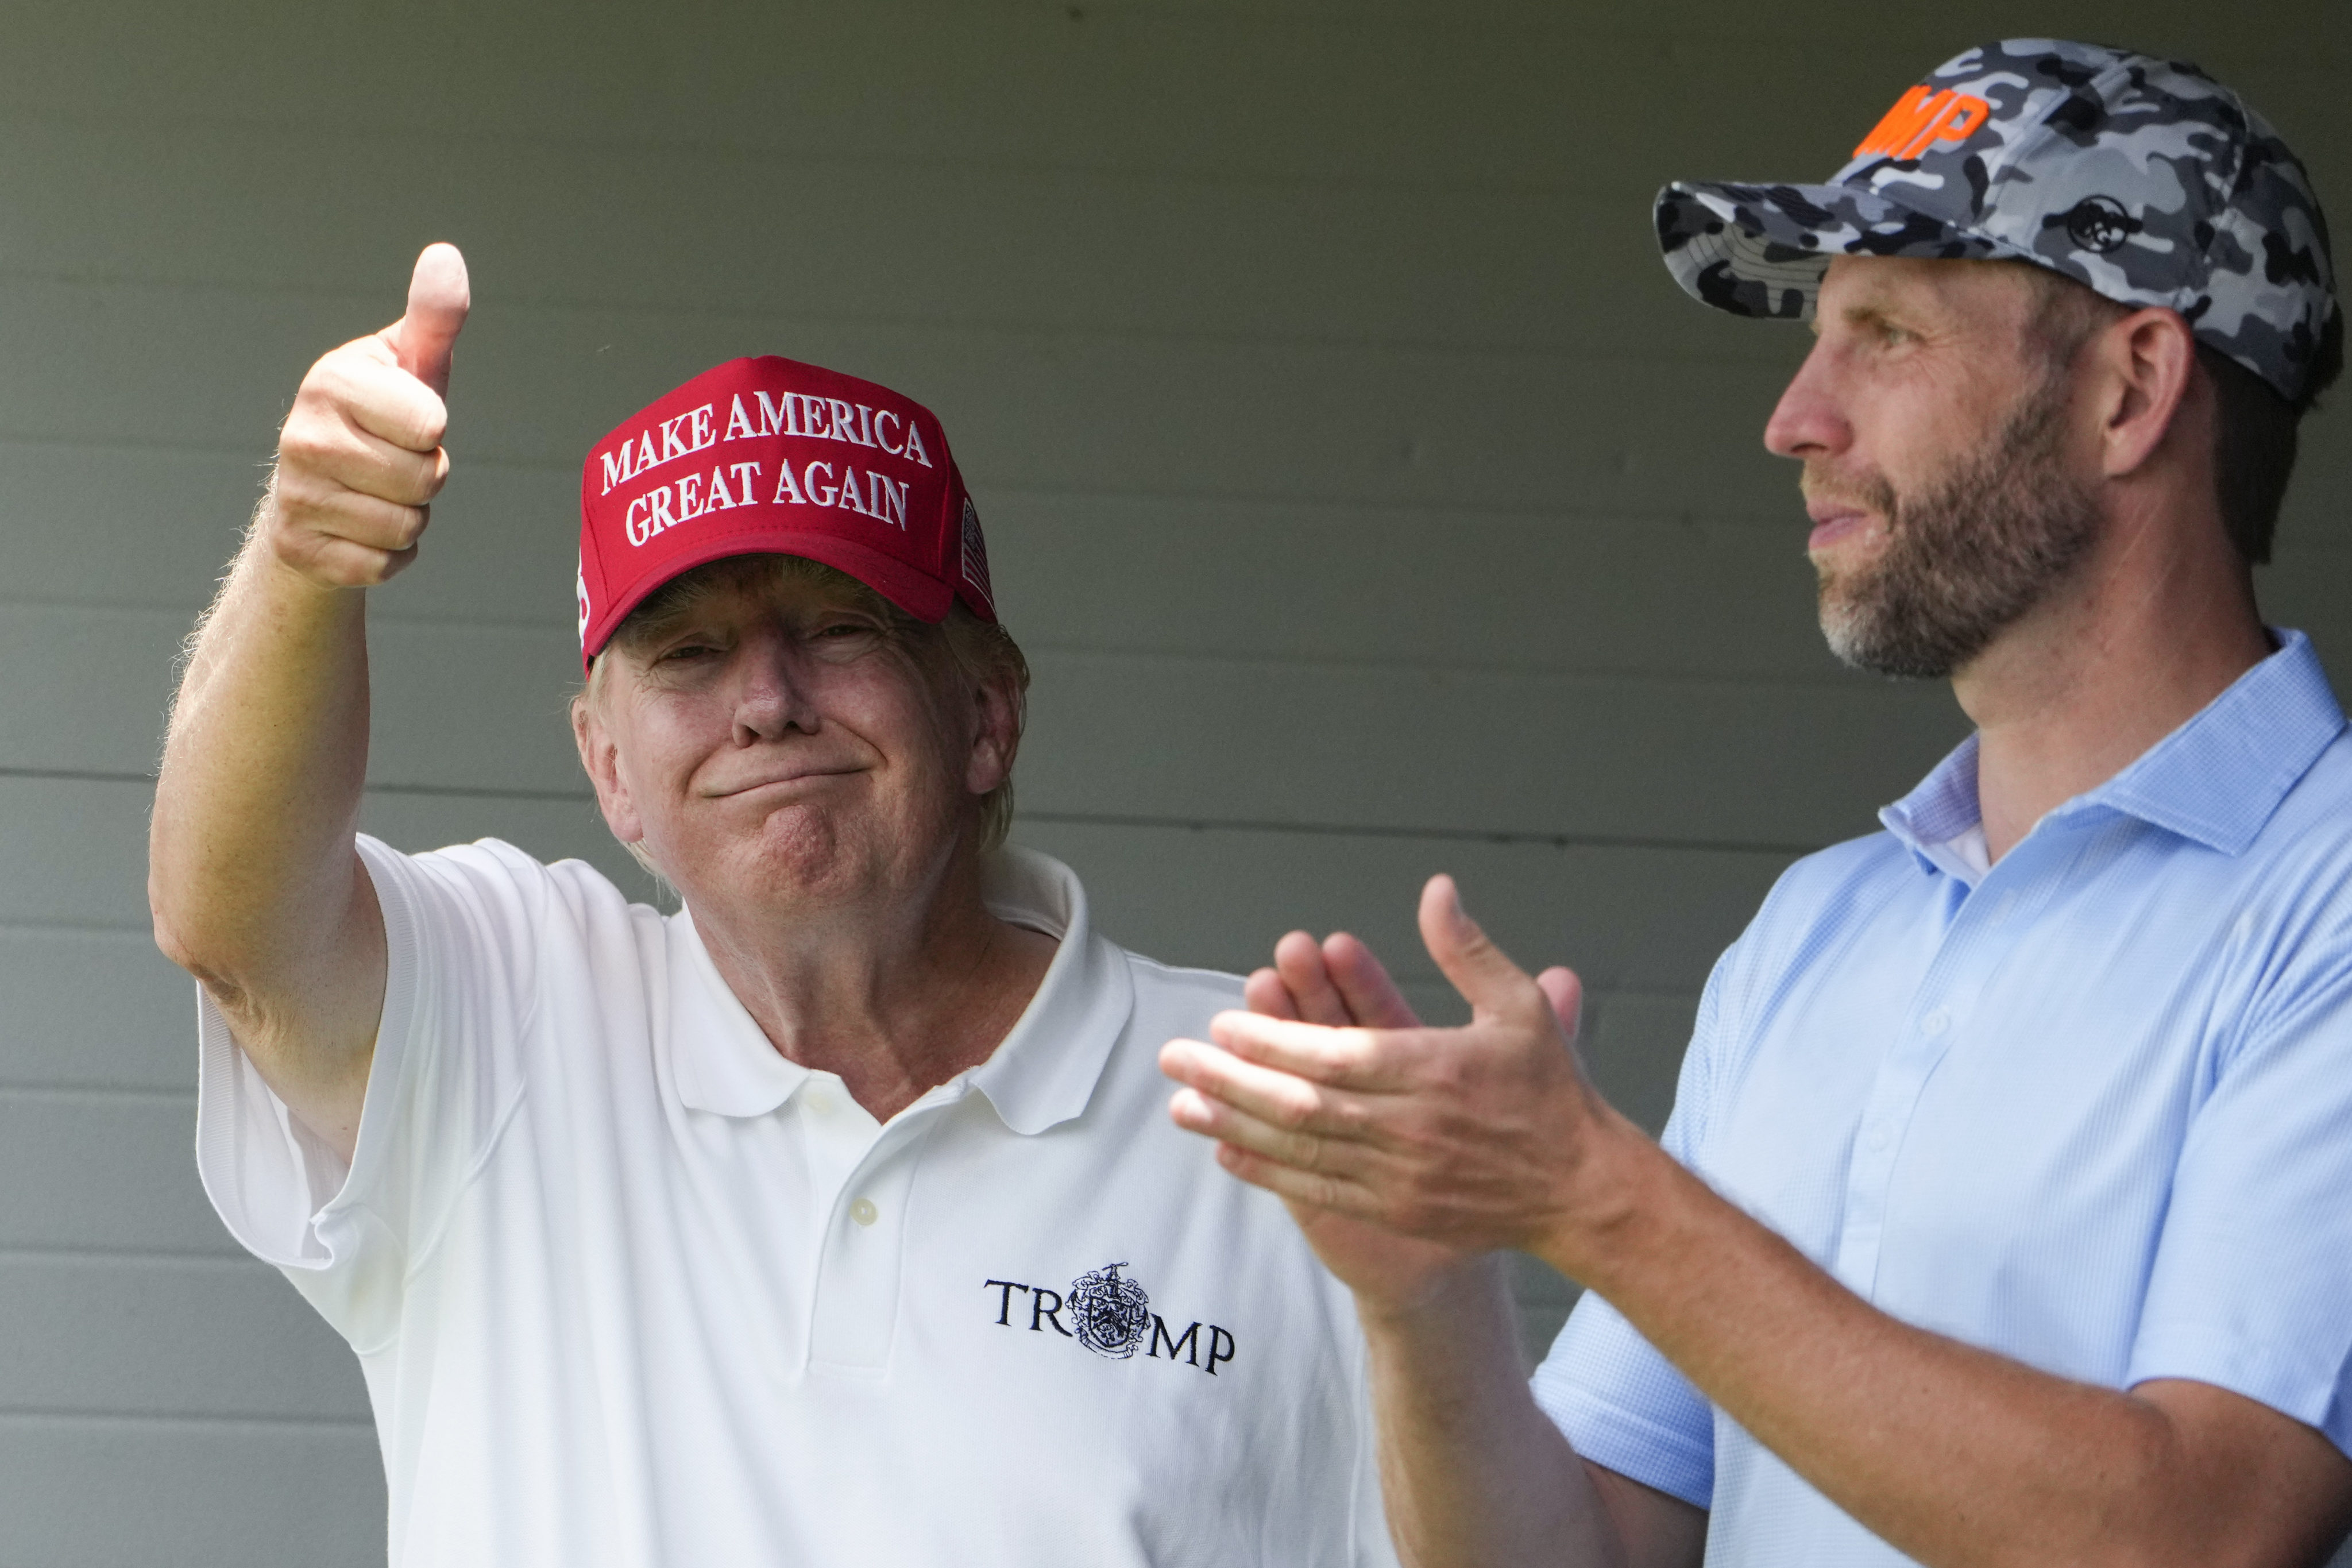 Donald Trump gives a thumbs up as he watches golf with his son Eric at his golf club in the US state of Virginia last month. Photo: AP